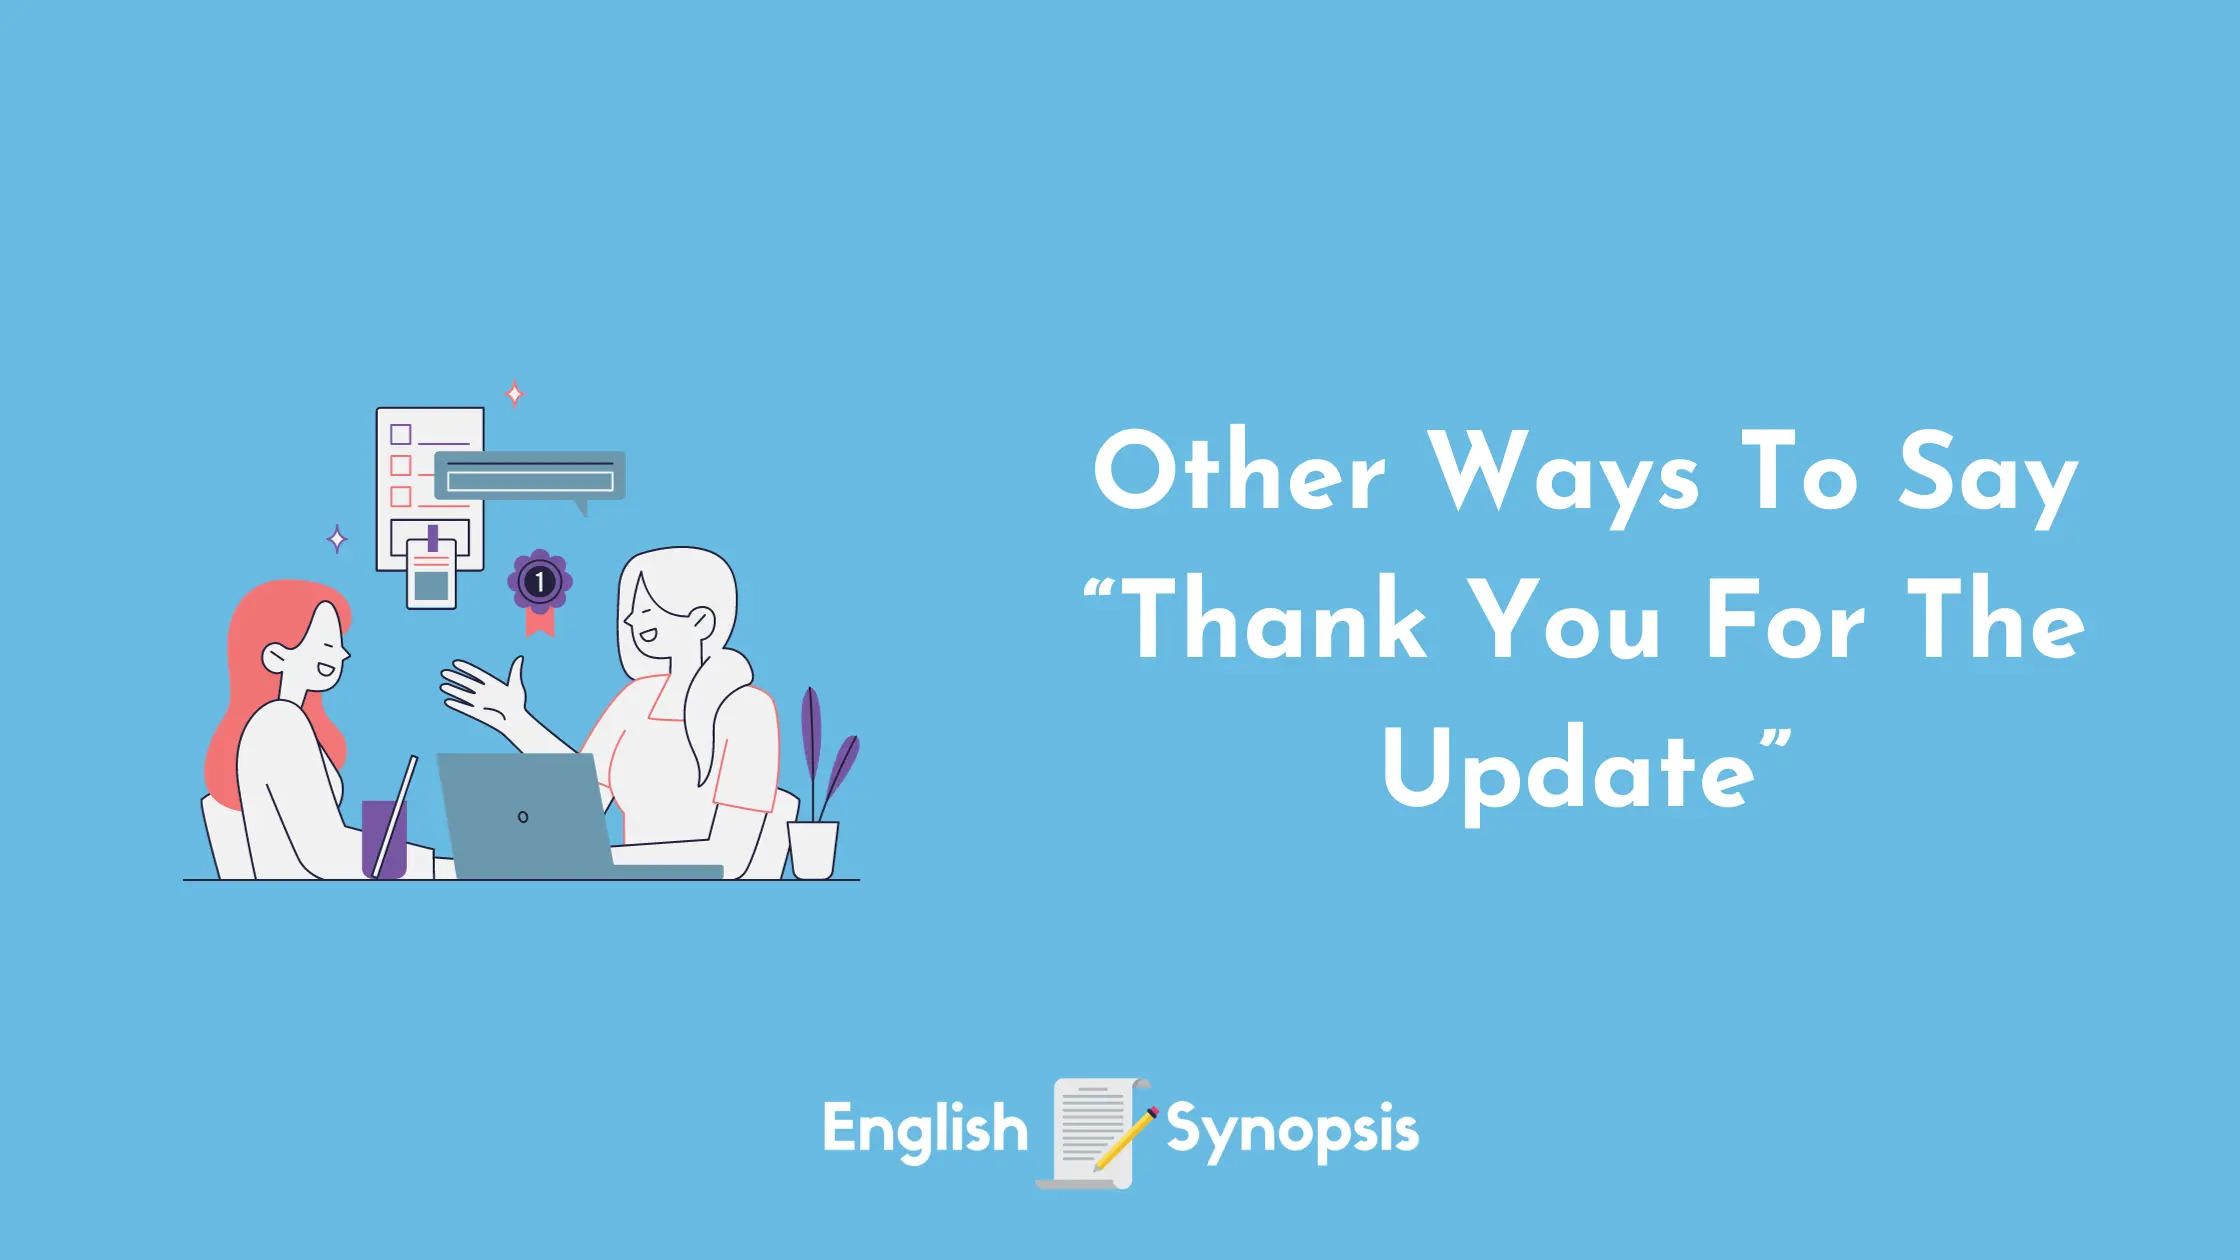 Other Ways To Say "Thank You For The Update"